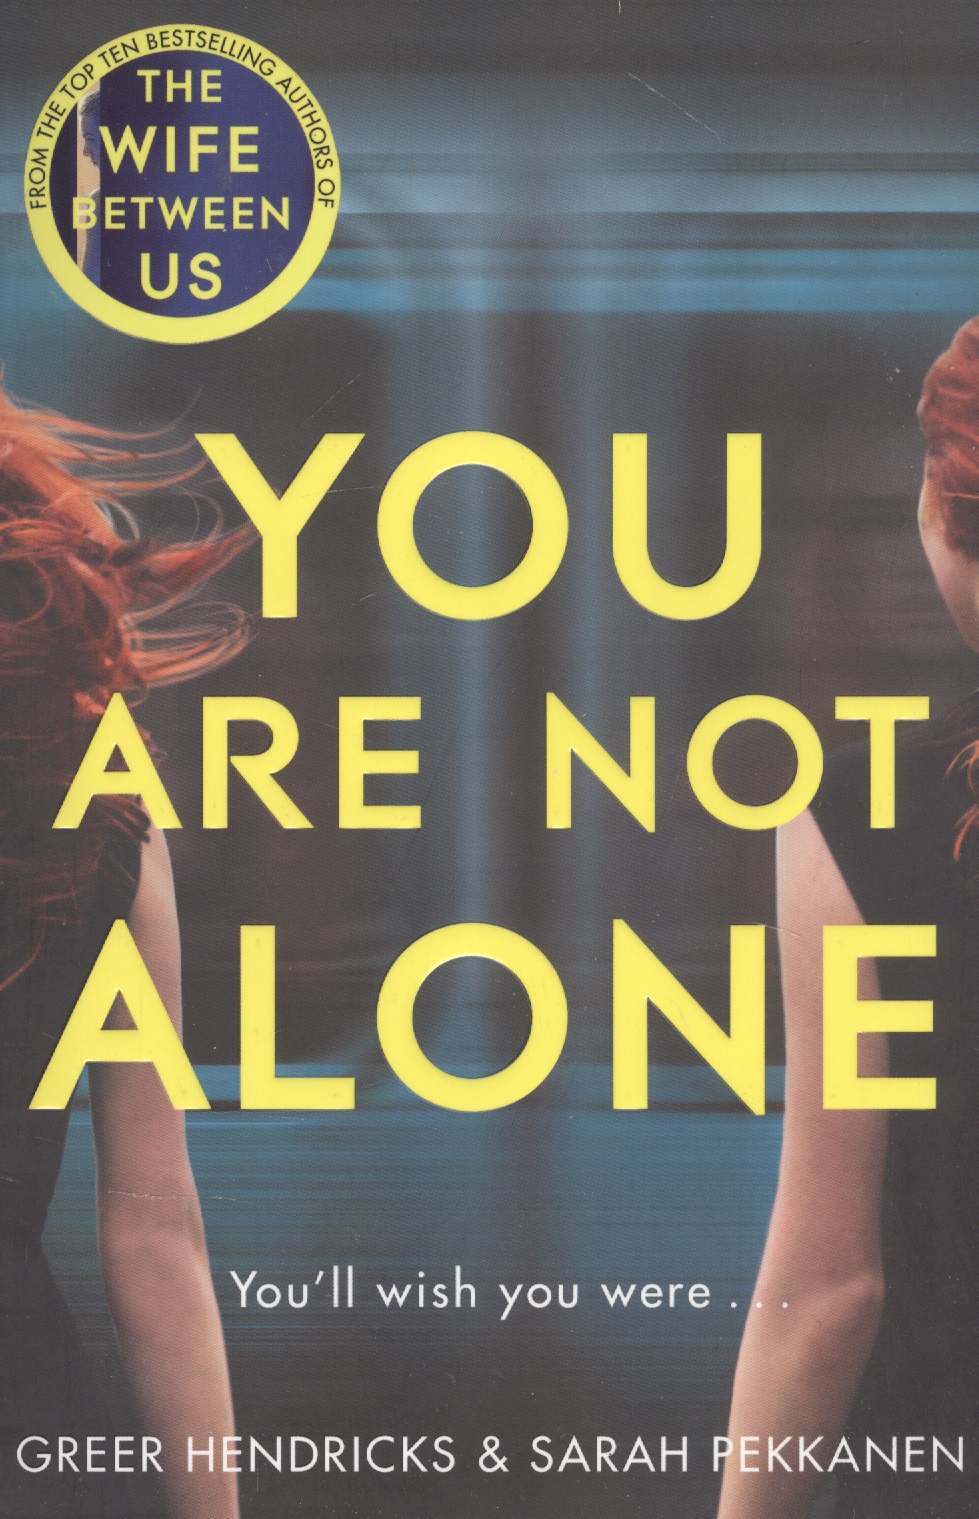 You Are Not Alone hendricks greer pekkanen sarah you are not alone